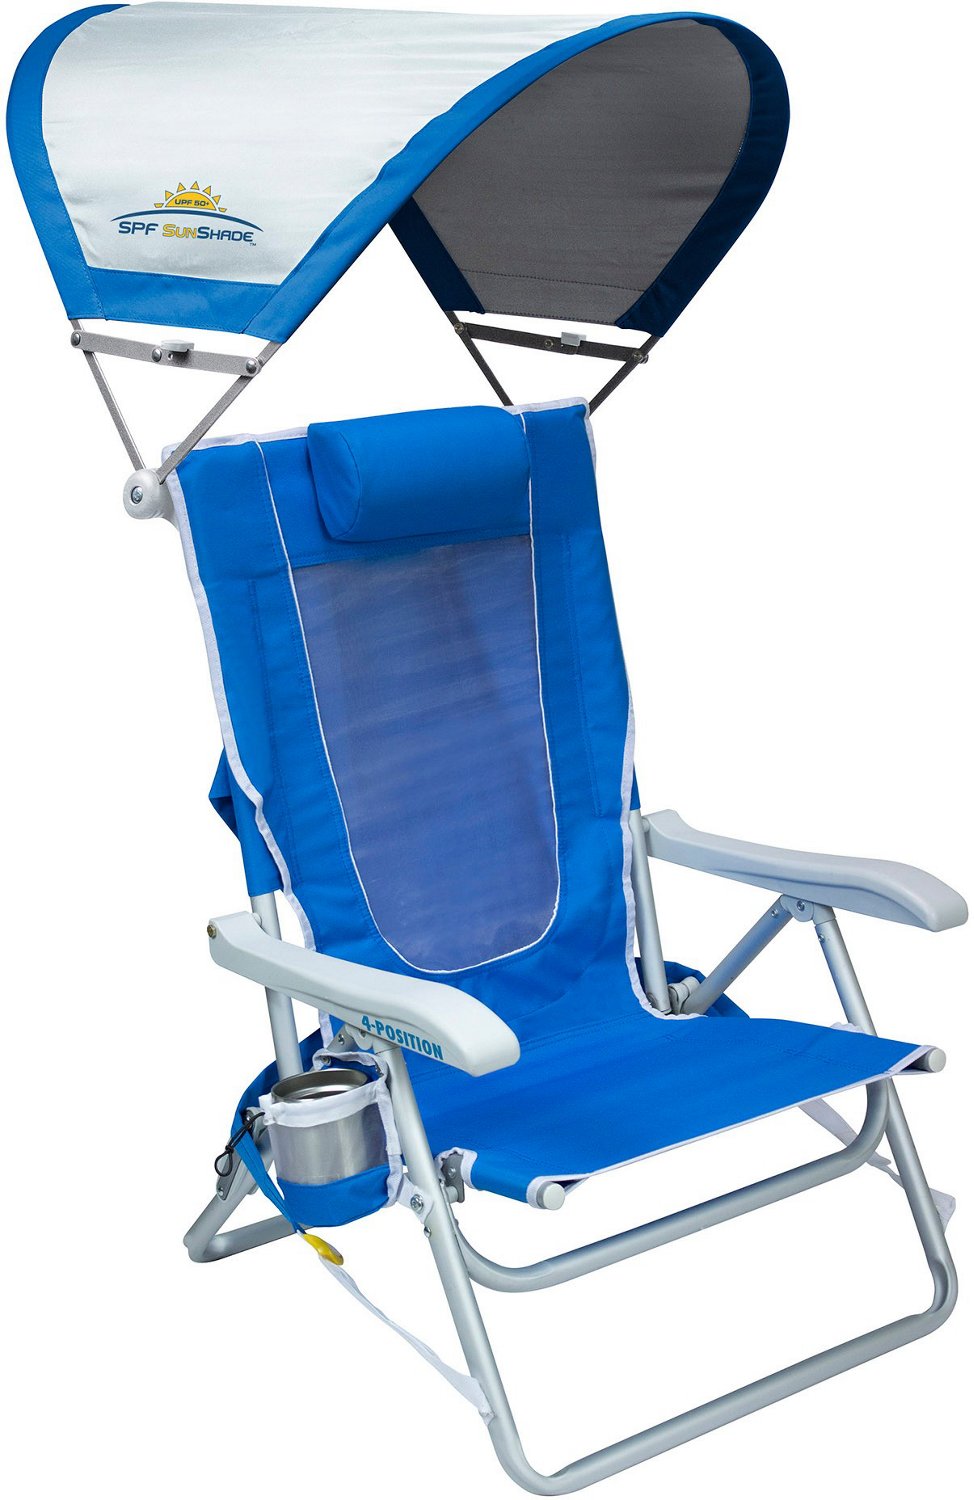  Gci Outdoor Beach Chair with Simple Decor